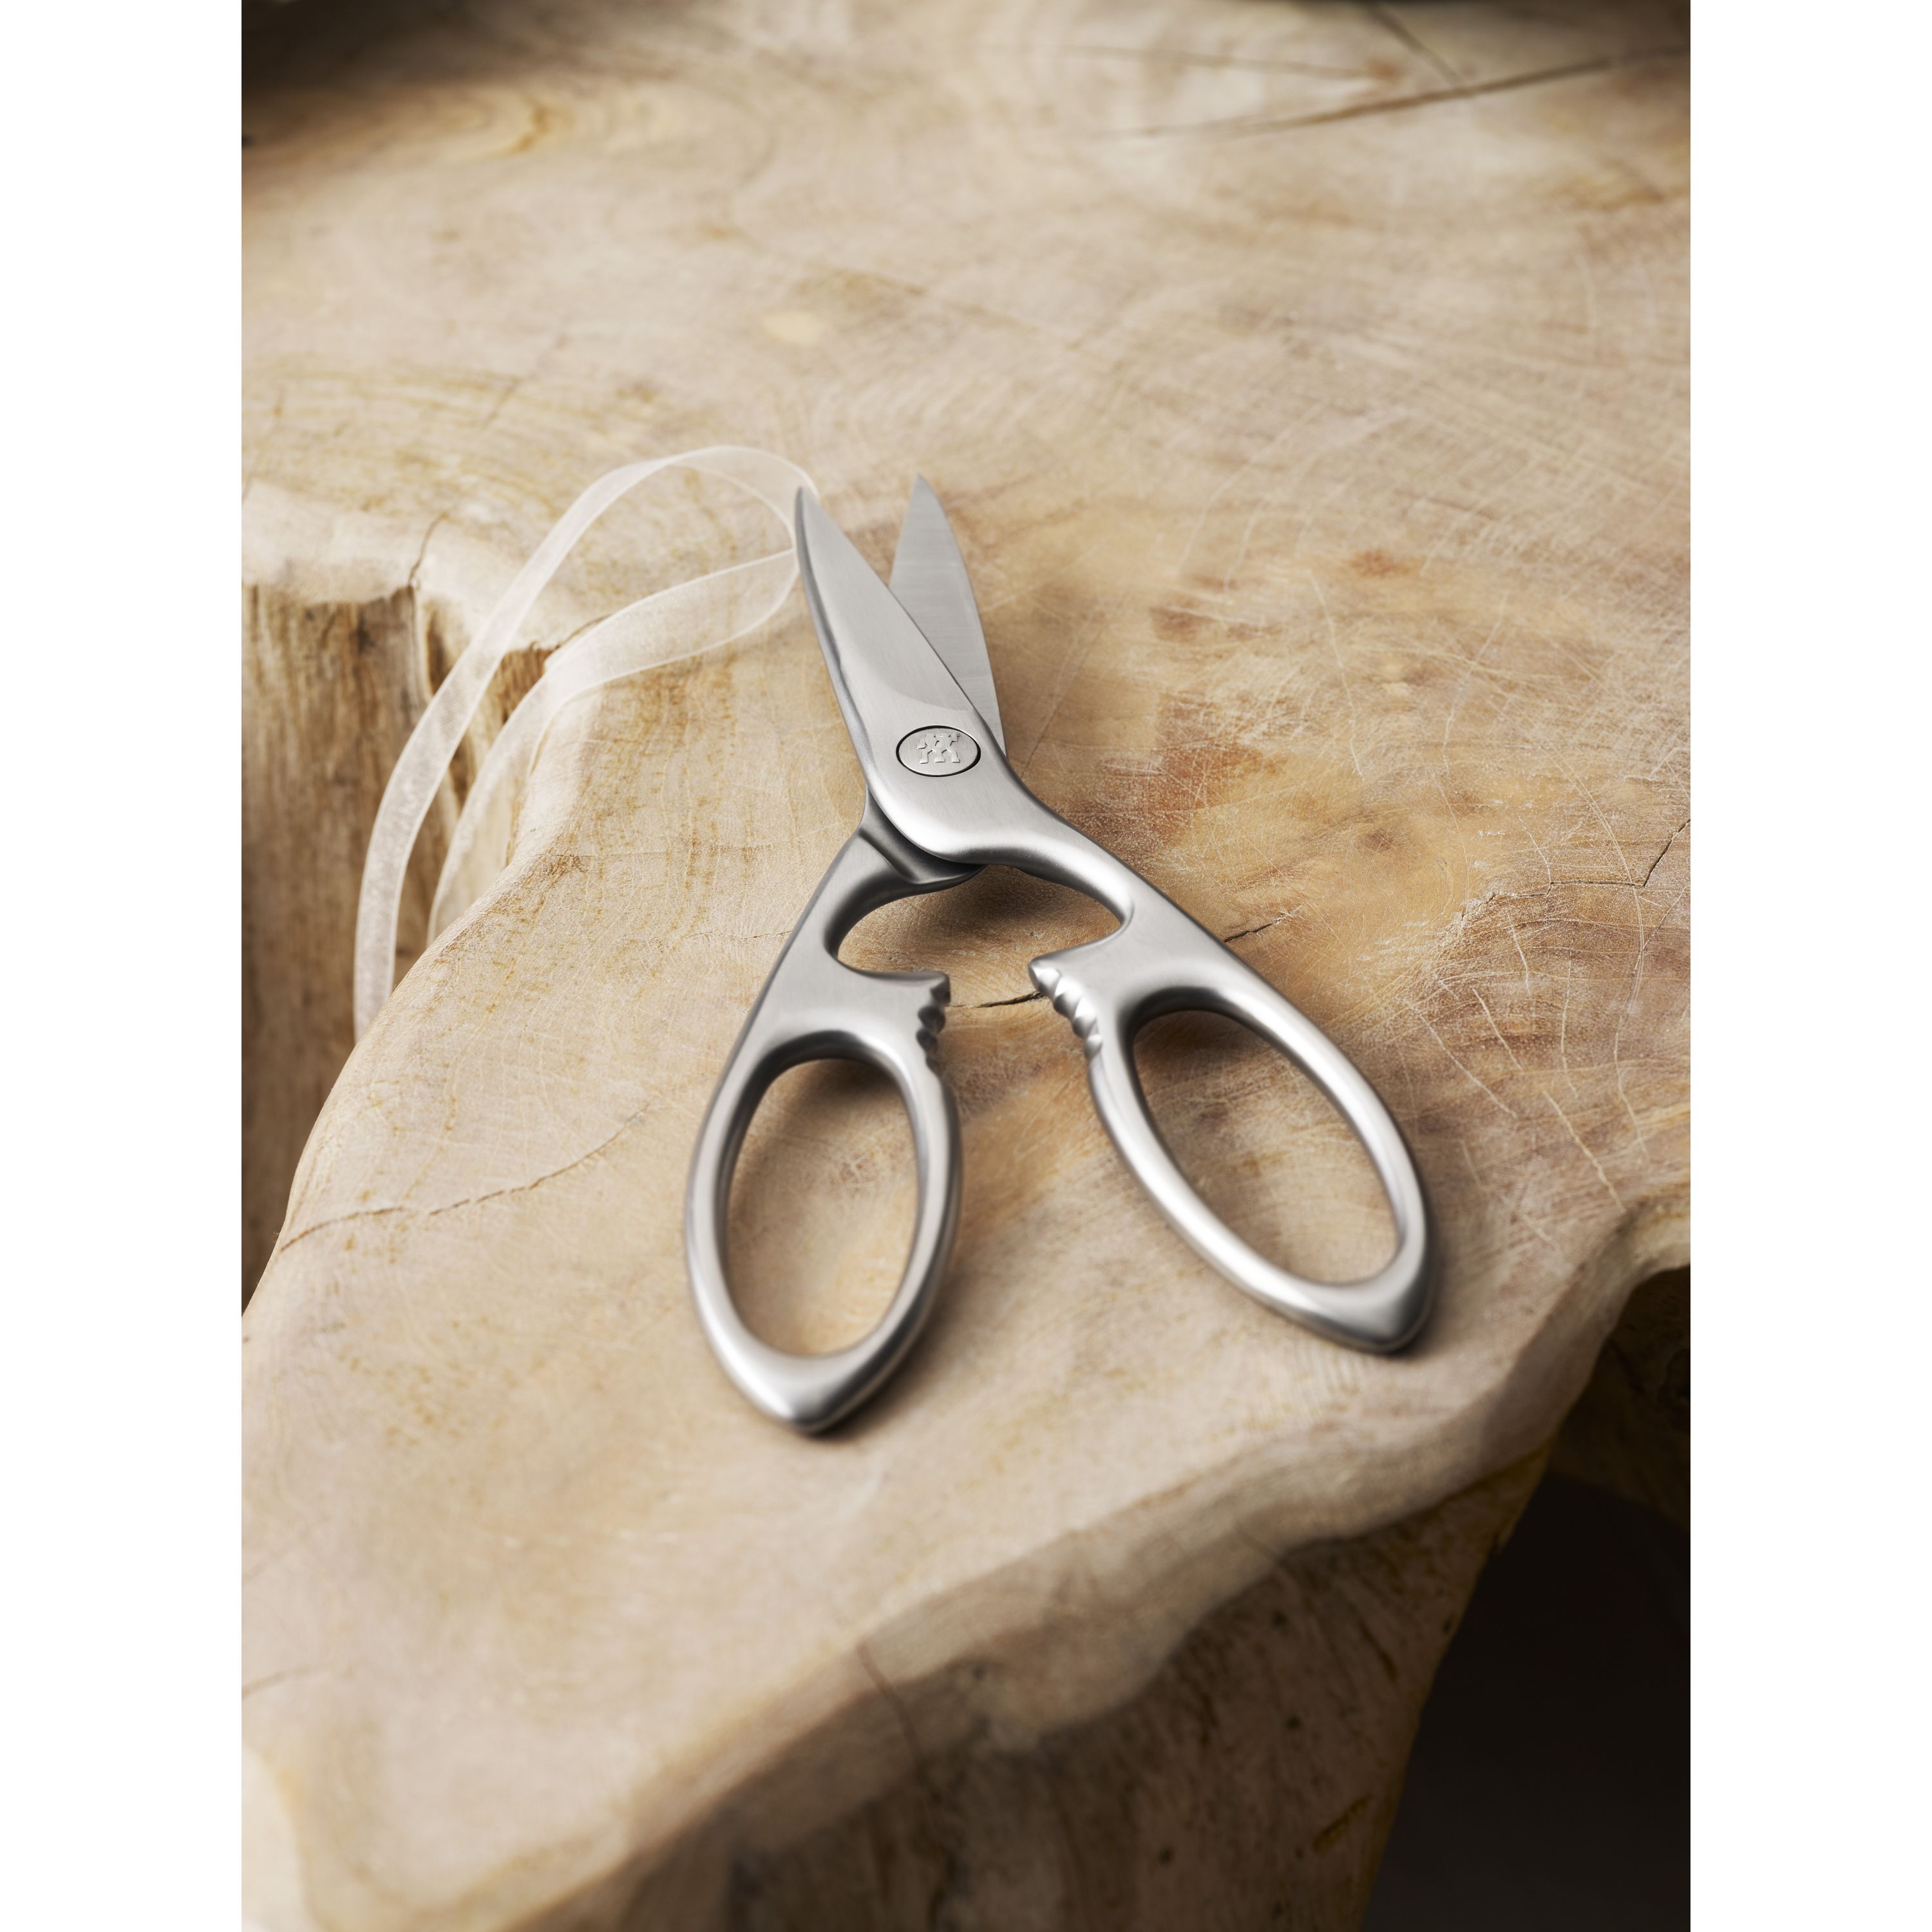 Zwilling Twin M Cooking Scissors Stainless Steel Kitchen Shears